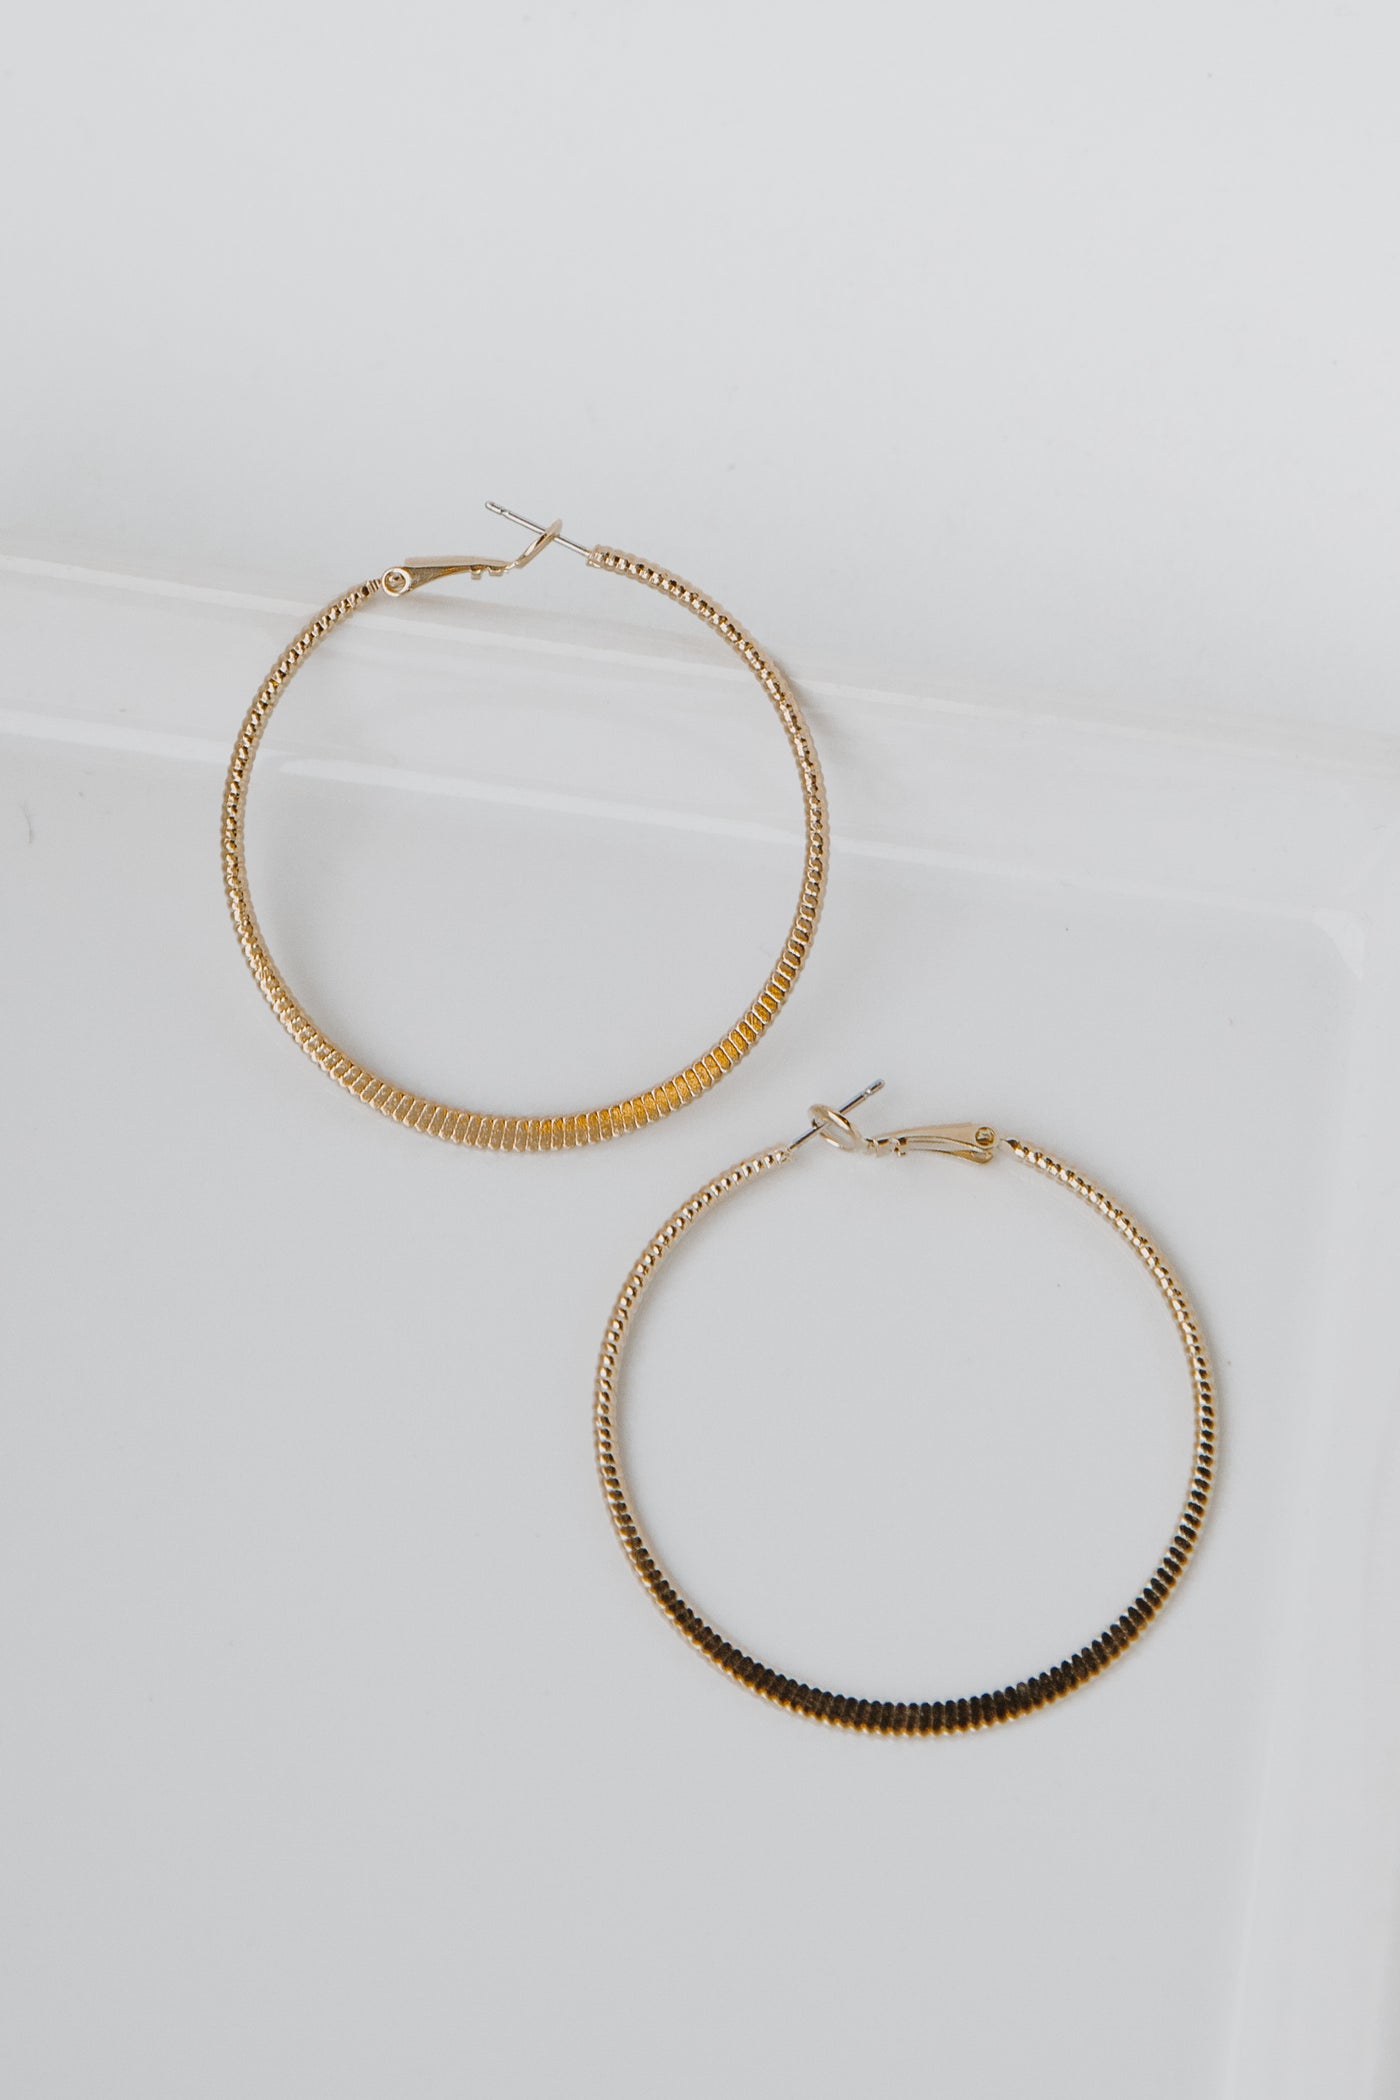 Gold Textured Small Hoop Earrings from dress up